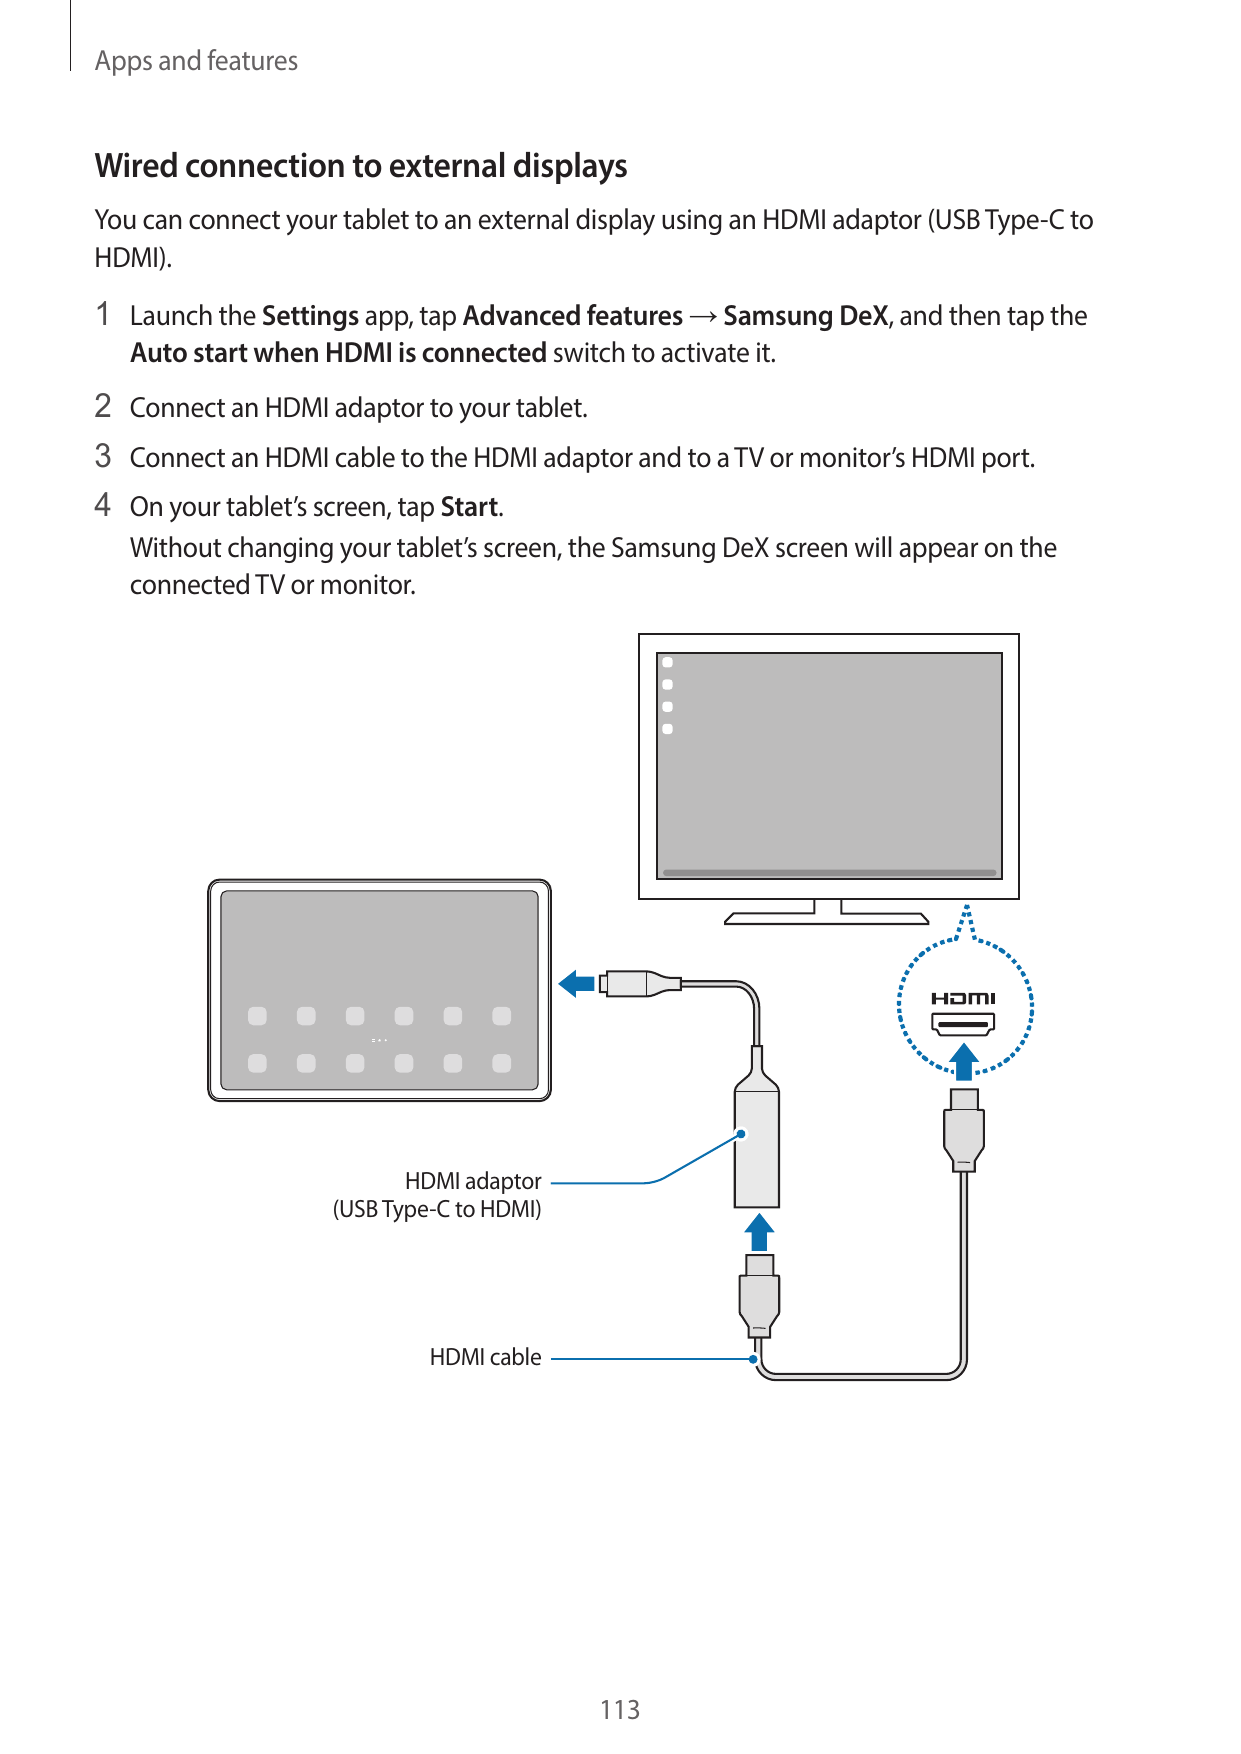 Apps and featuresWired connection to external displaysYou can connect your tablet to an external display using an HDMI adaptor (